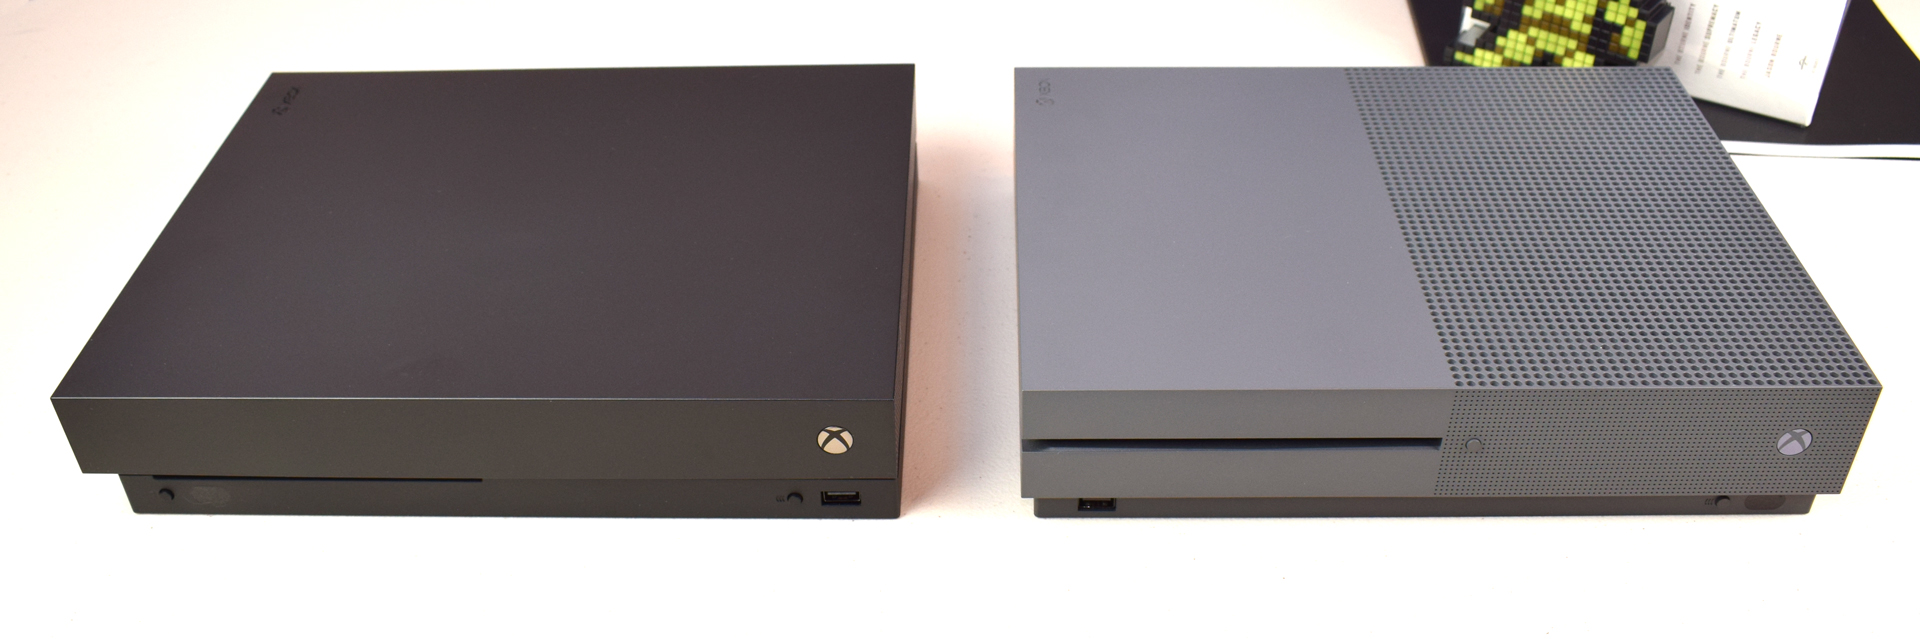 difference between xbox one x and s